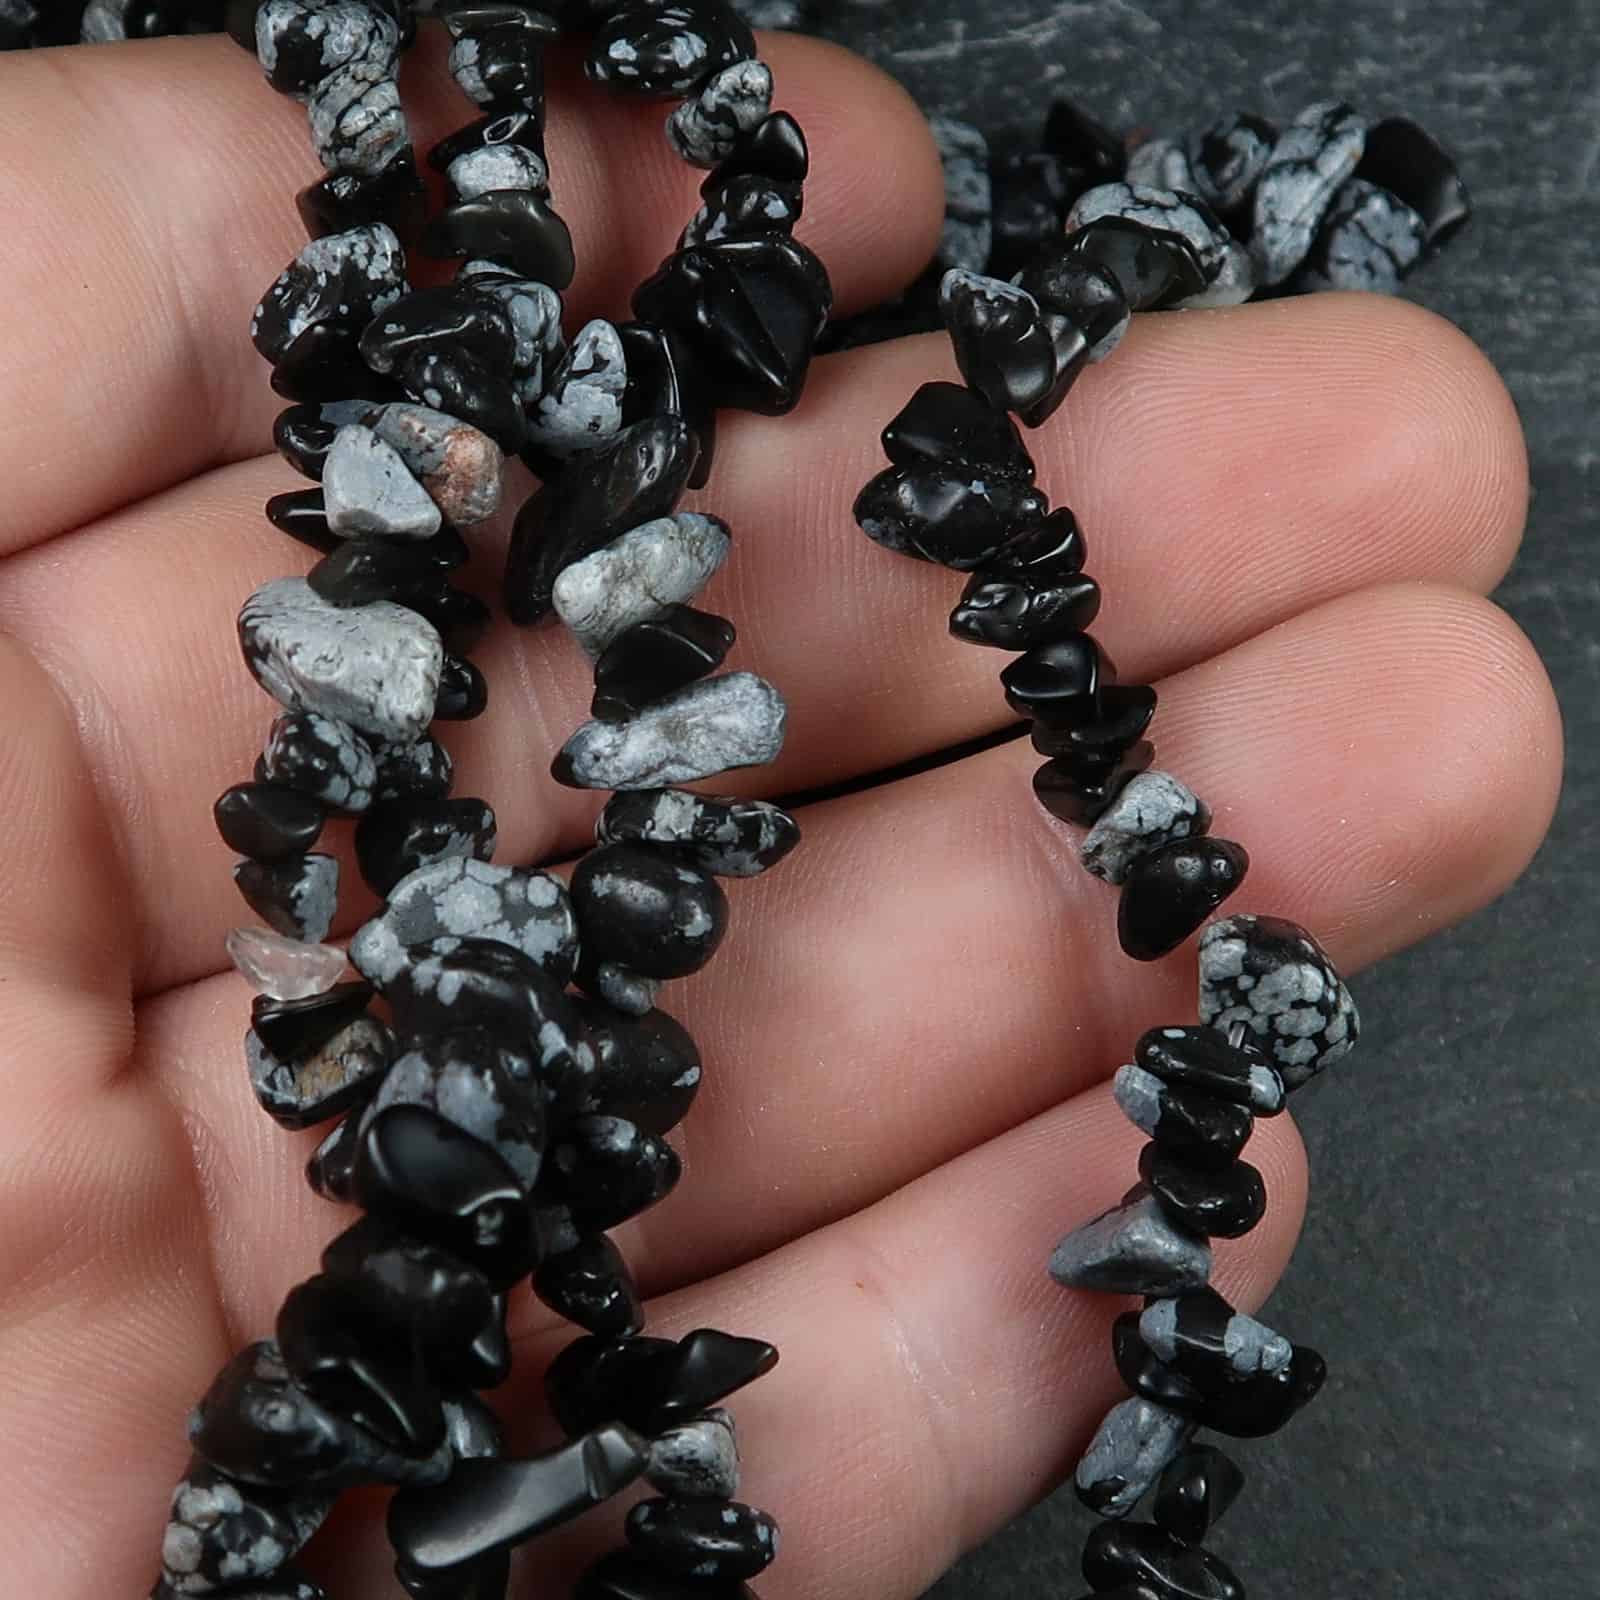 14mm snowflake glass beads for jewelry